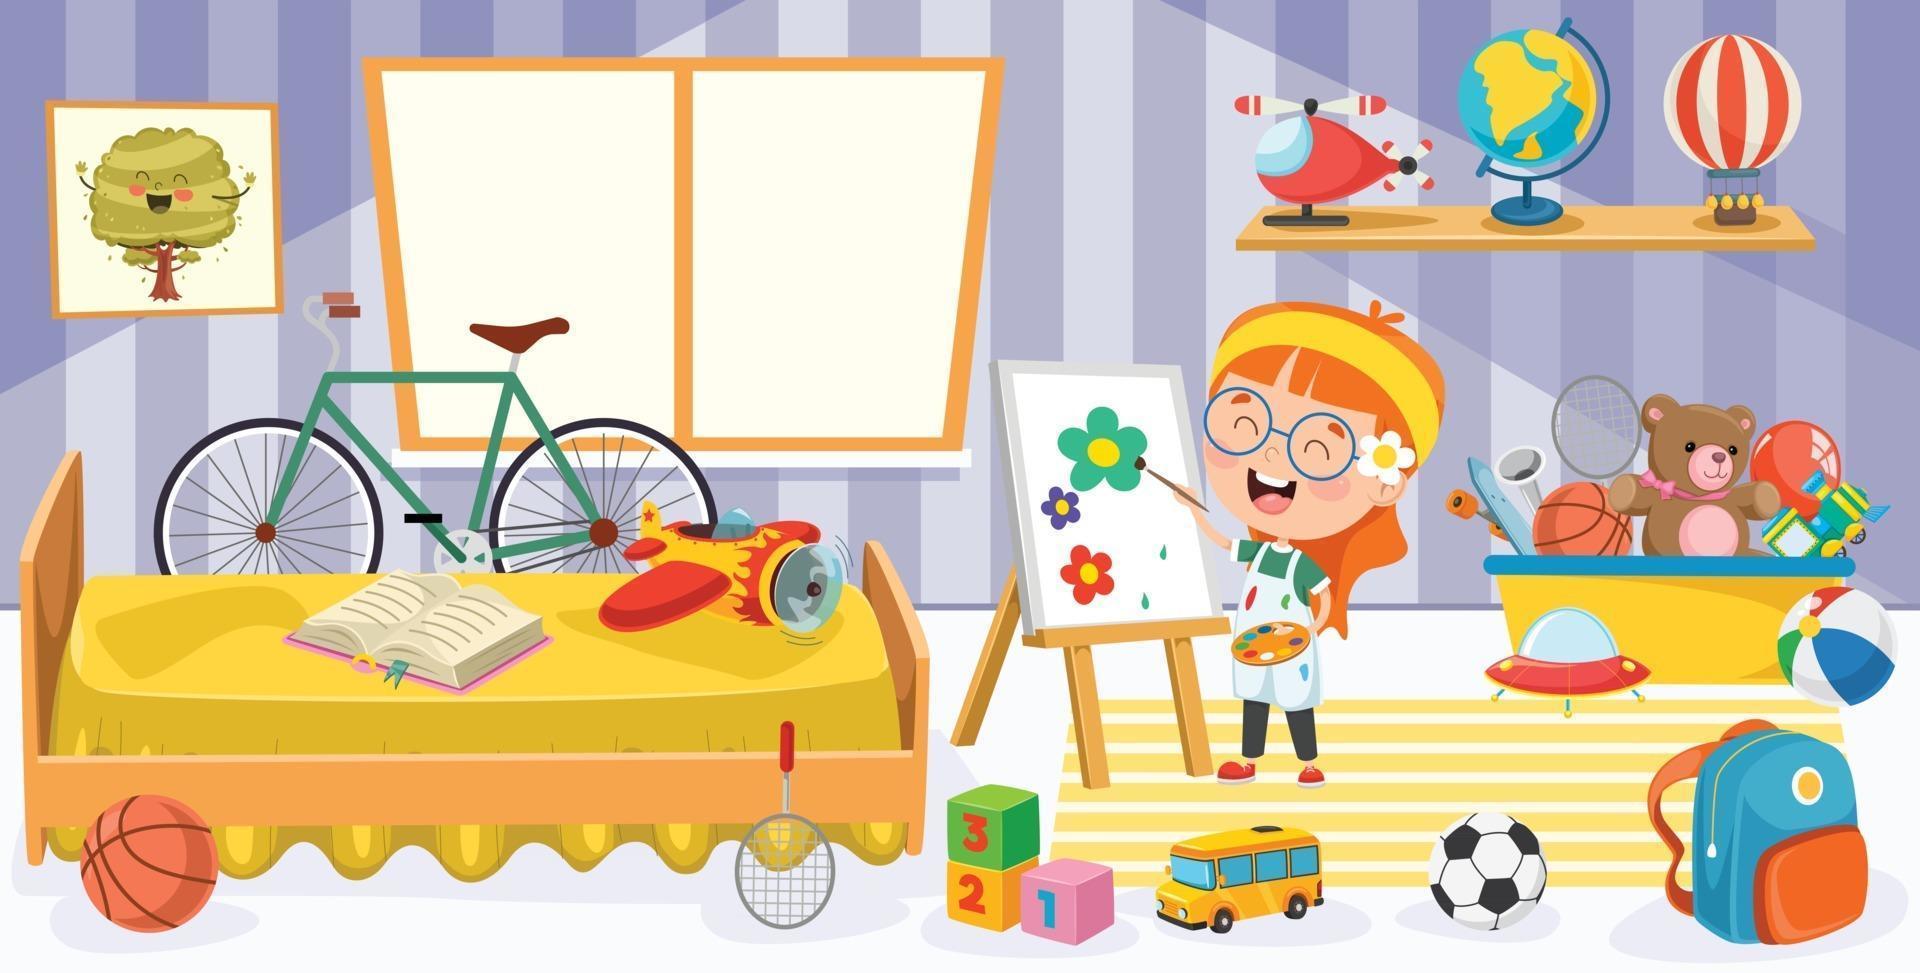 Child Having Fun In A Room vector